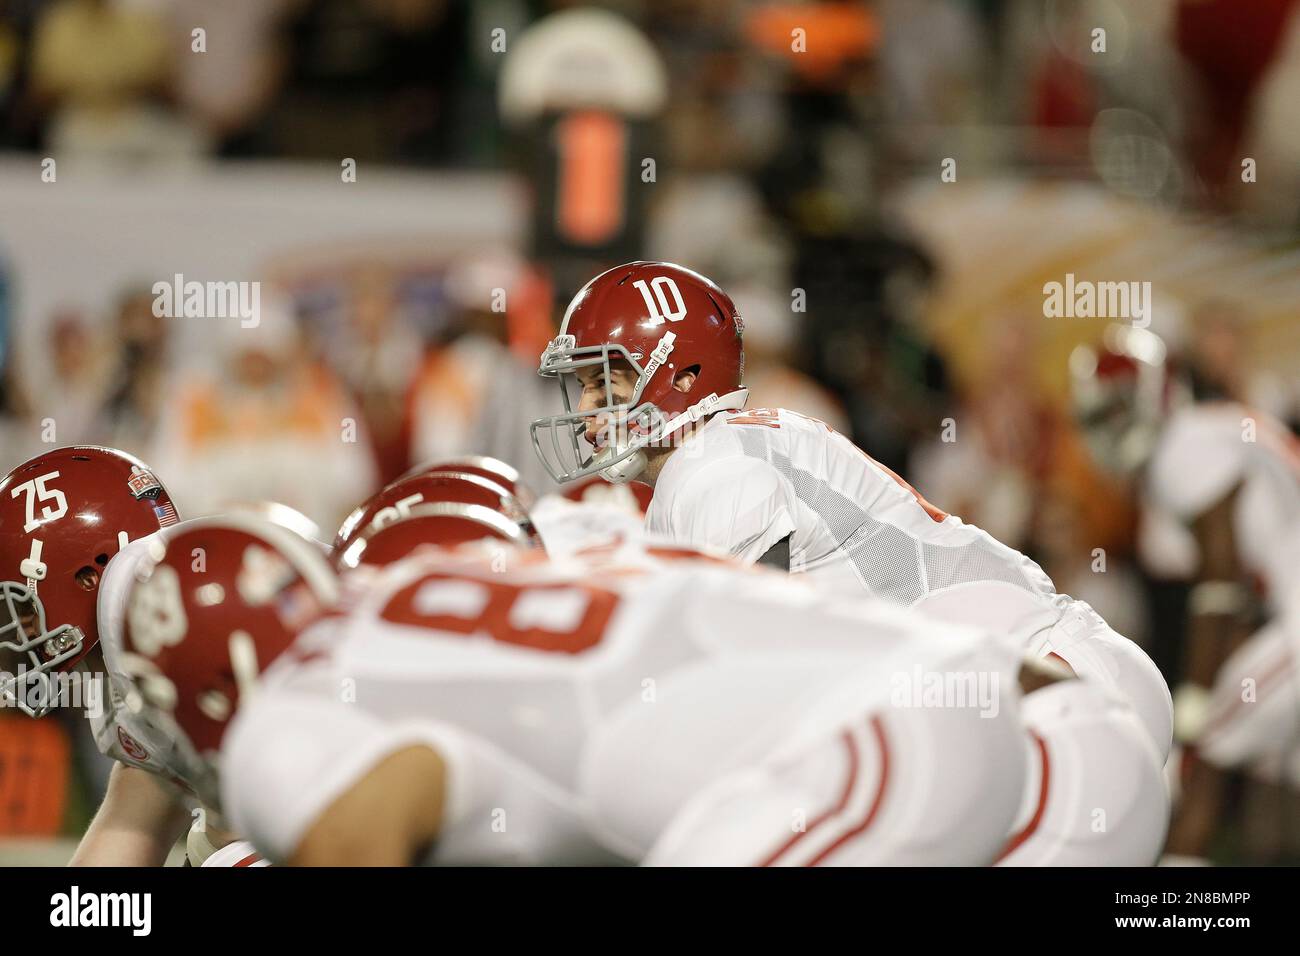 Alabama quarterback AJ McCarron (10) works against Notre Dame during the first half of the BCS National Championship college football game Monday, Jan. 7, 2013, in Miami. (AP Photo/Chris O'Meara) Stock Photo